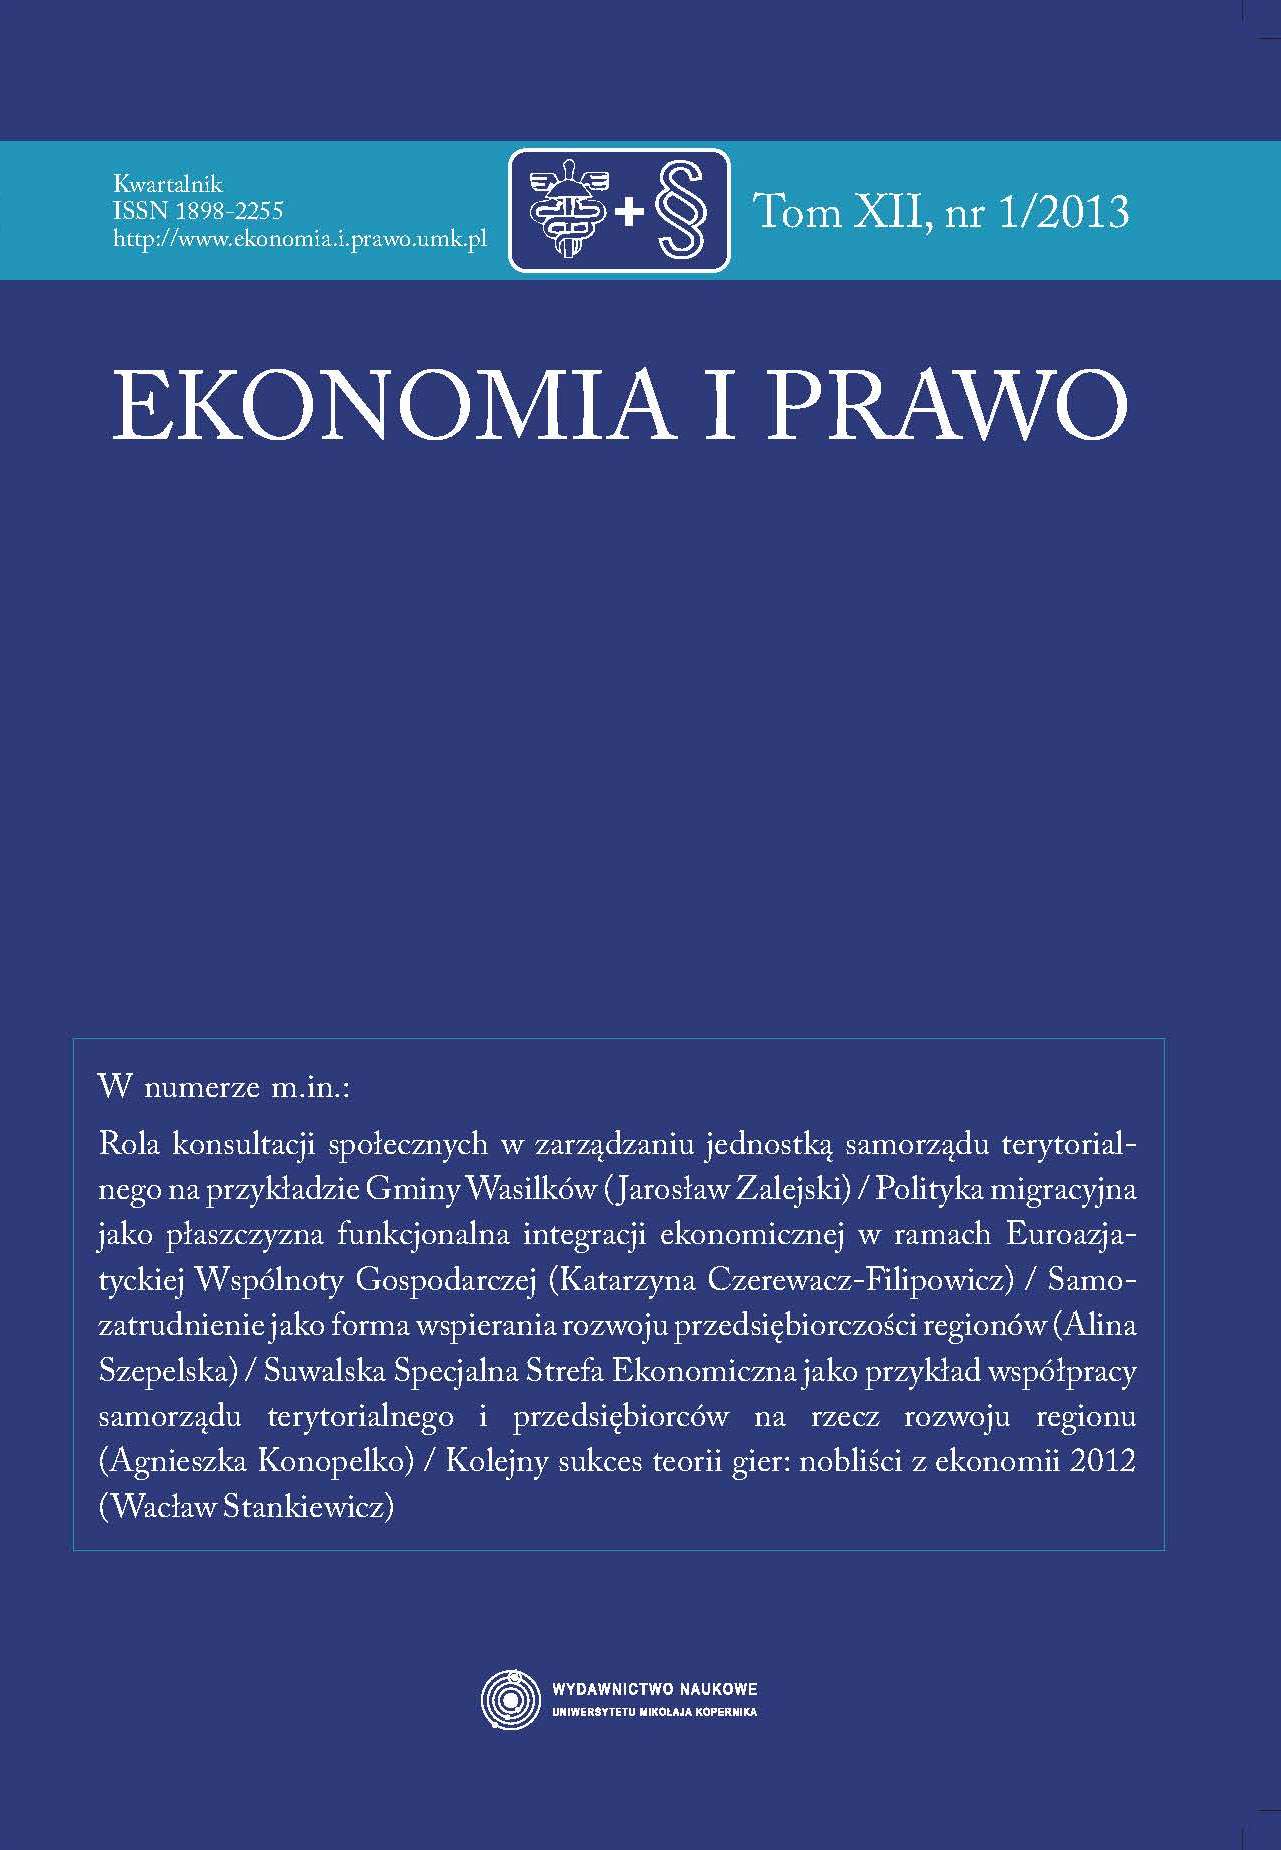 MIGRATION POLICY AS A FUNCTIONAL PLATFORM OF ECONOMIC INTEGRATION WITHIN THE EURASIAN ECONOMIC COMMUNITY